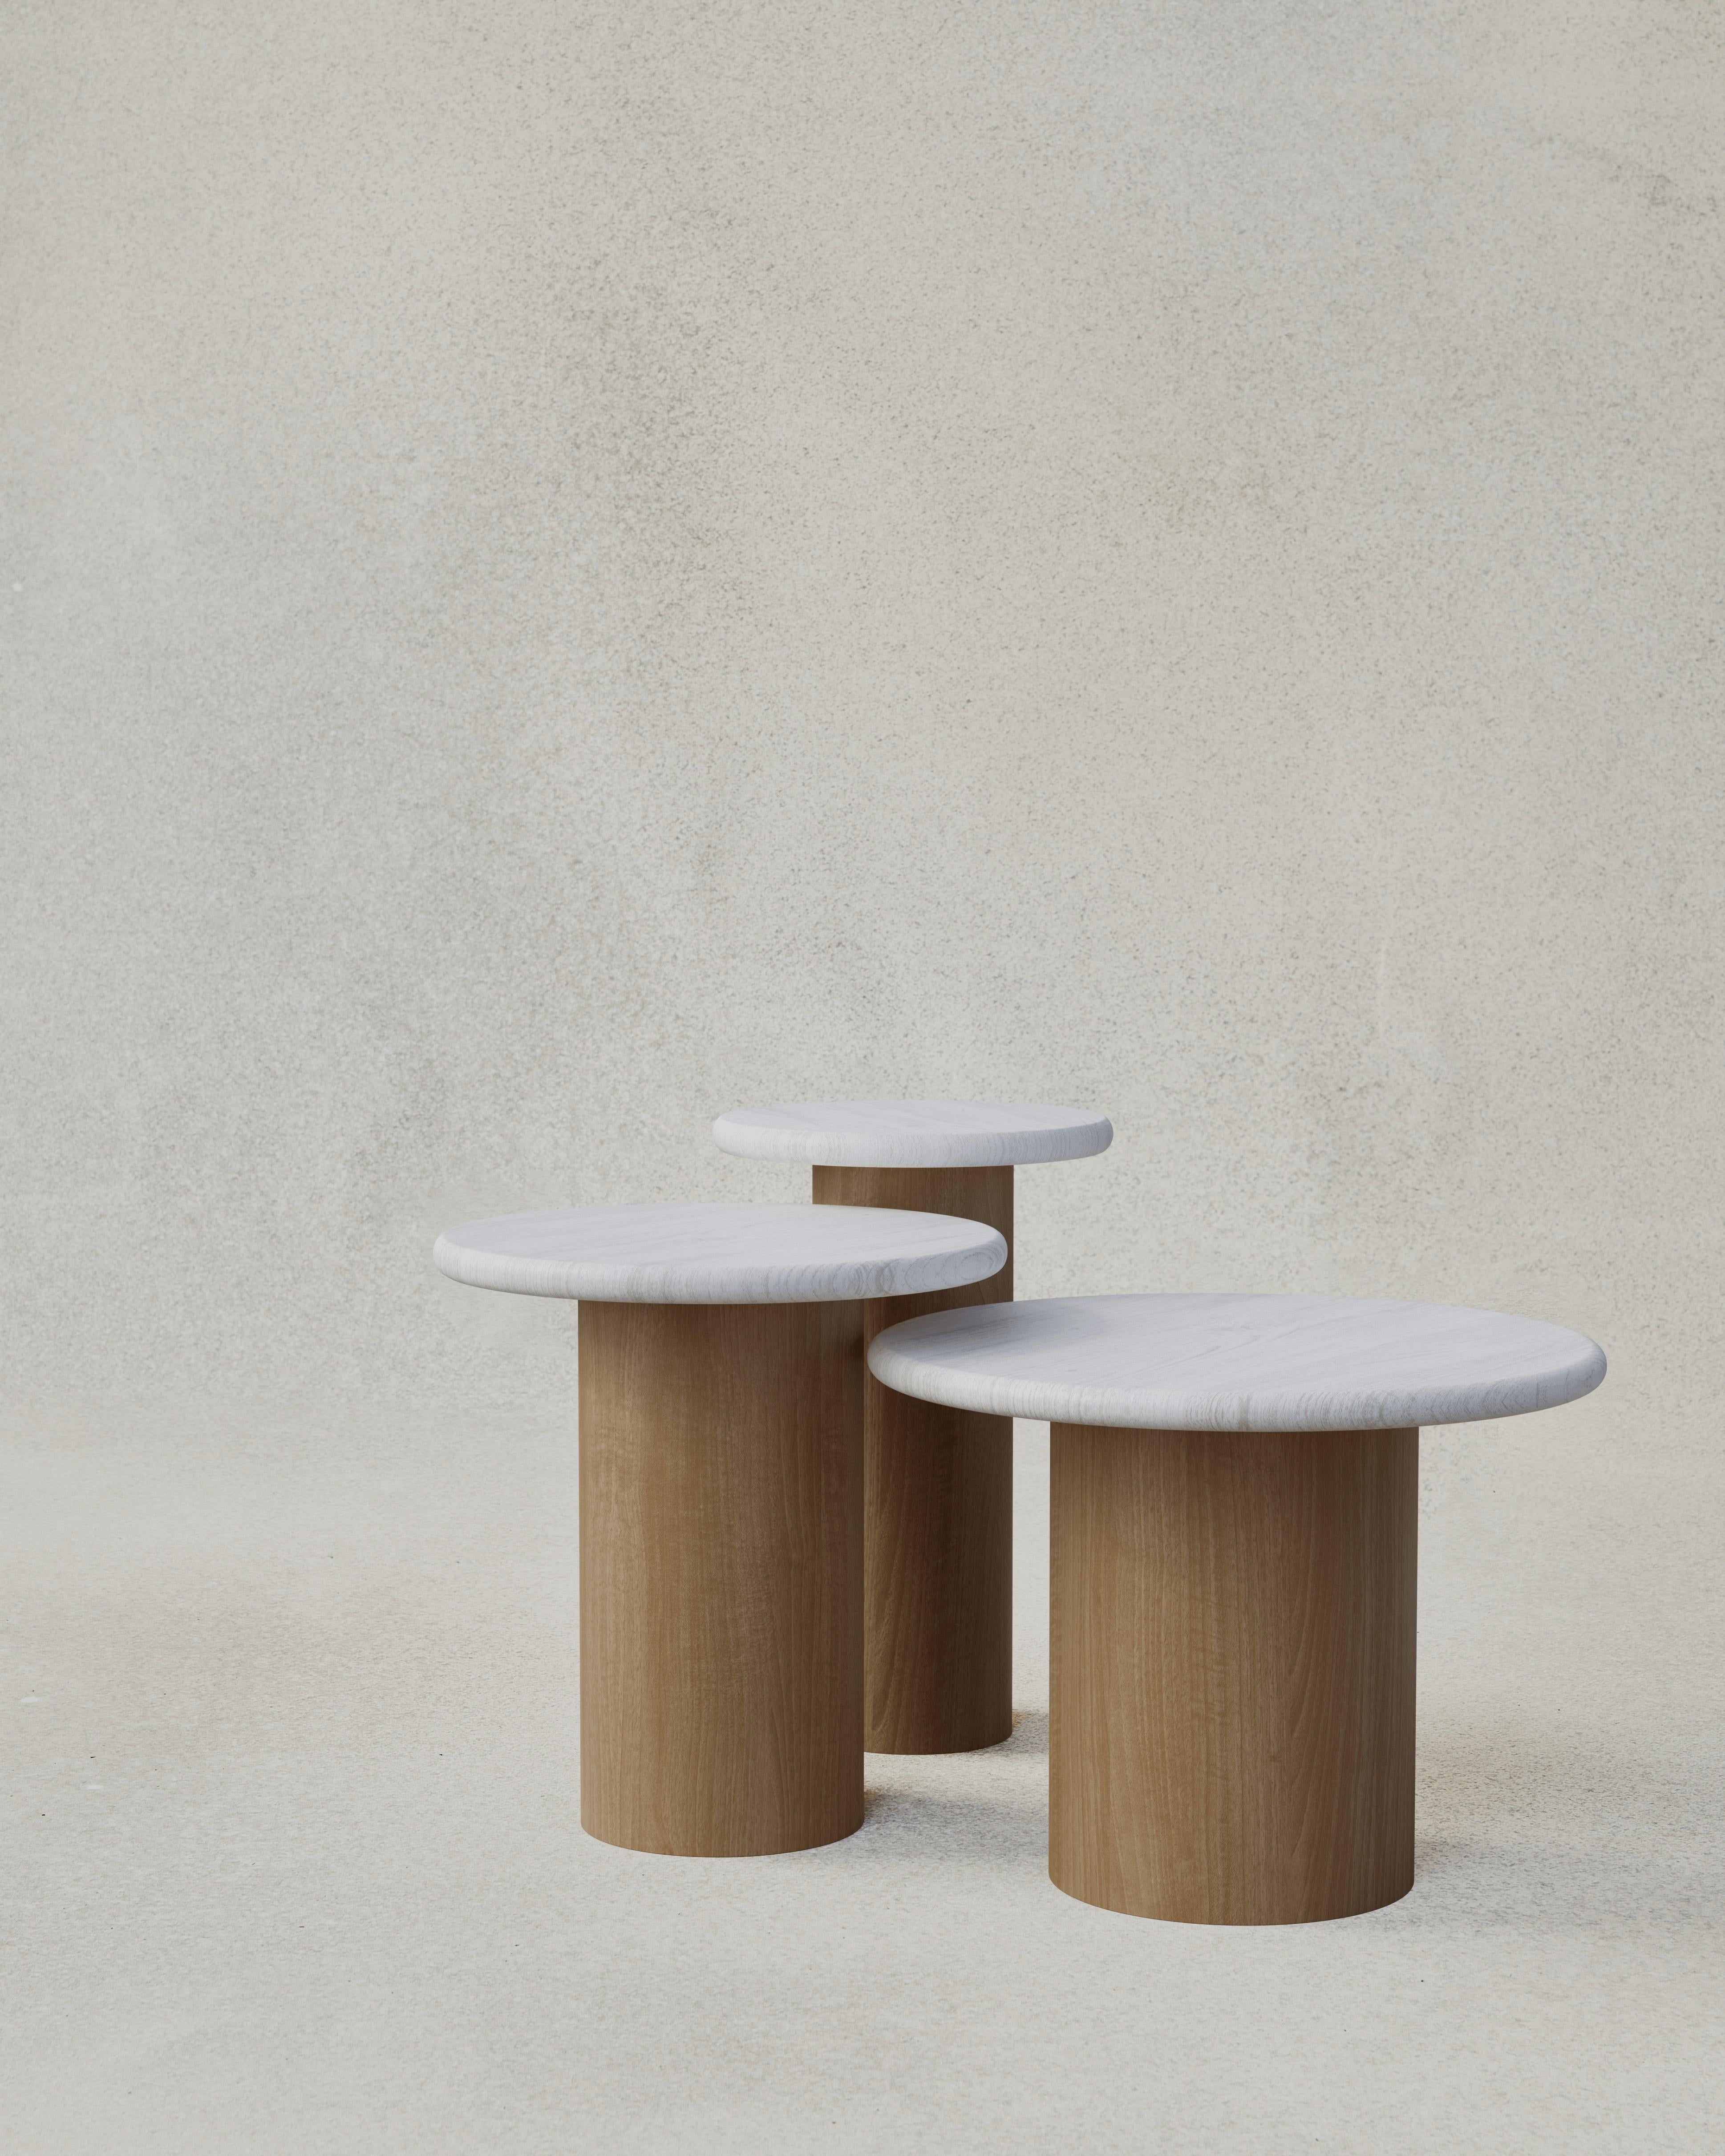 With their circular profiles, varying proportions and potential to be nested, these versatile tables evoke the pattern of raindrops in a pool of water when placed together.

Bought as a set of 300, 400, 500, we add a 10% discount

Tops: Black